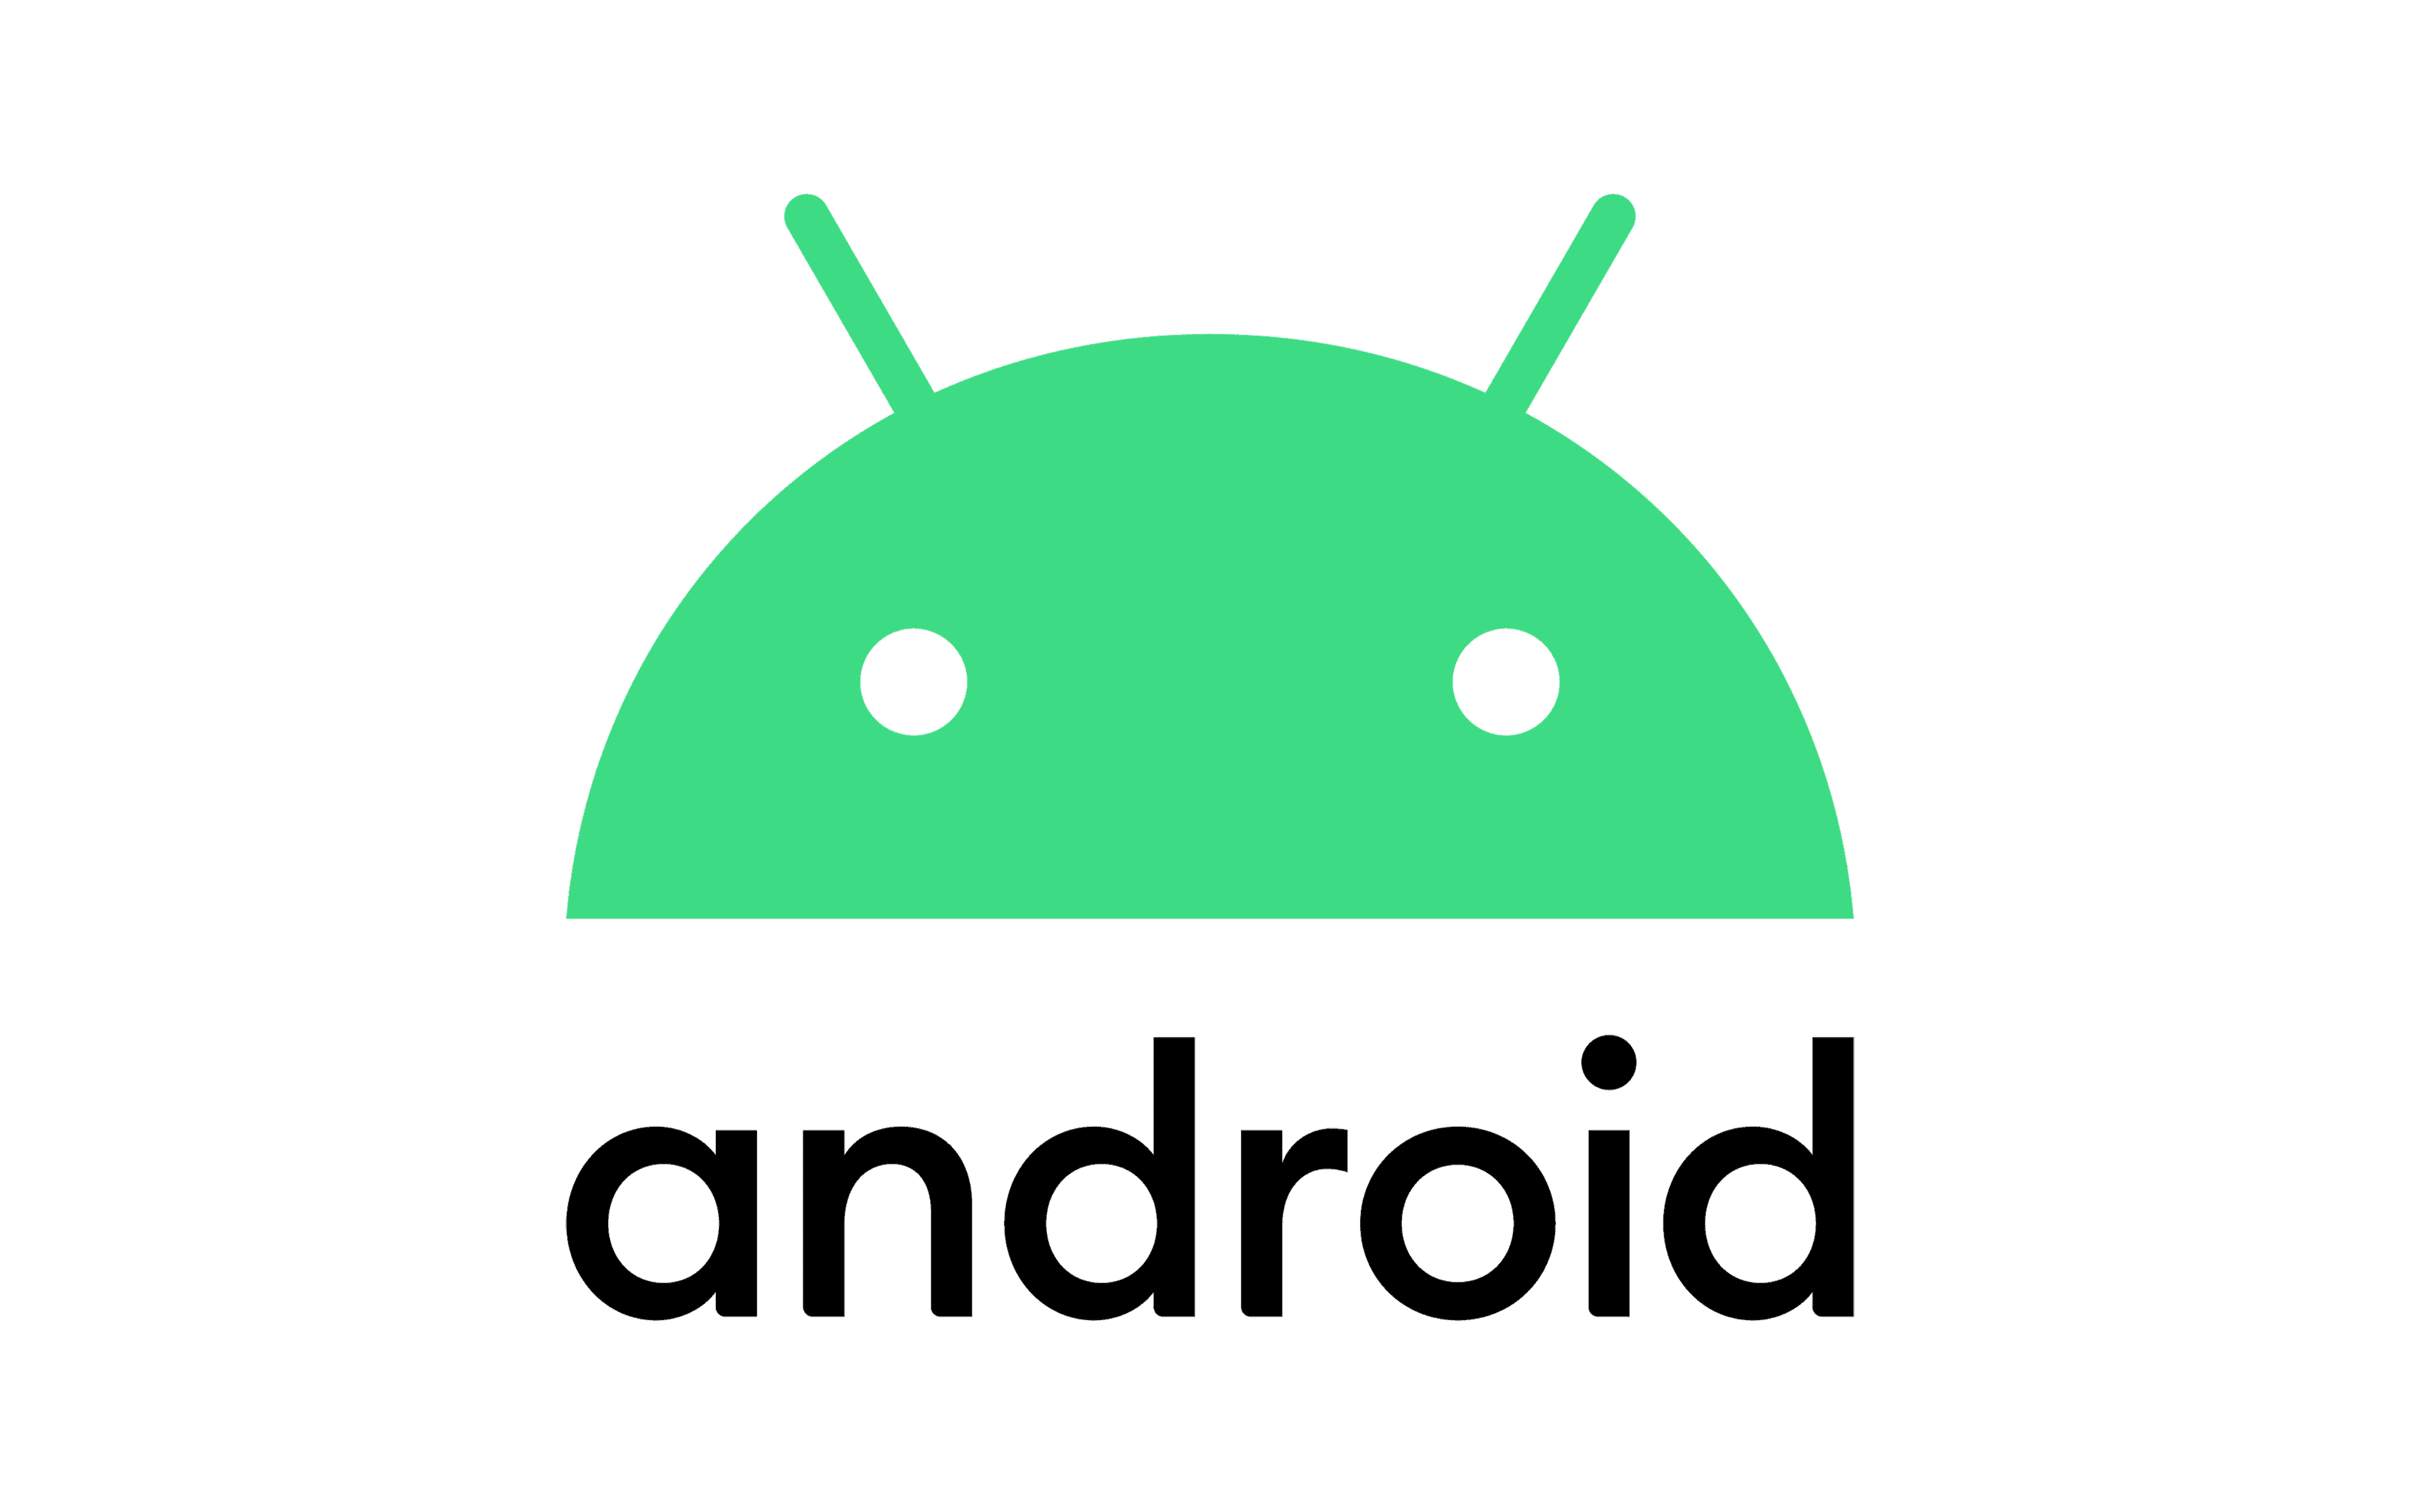 Android Logo PNG Vectors Free Download